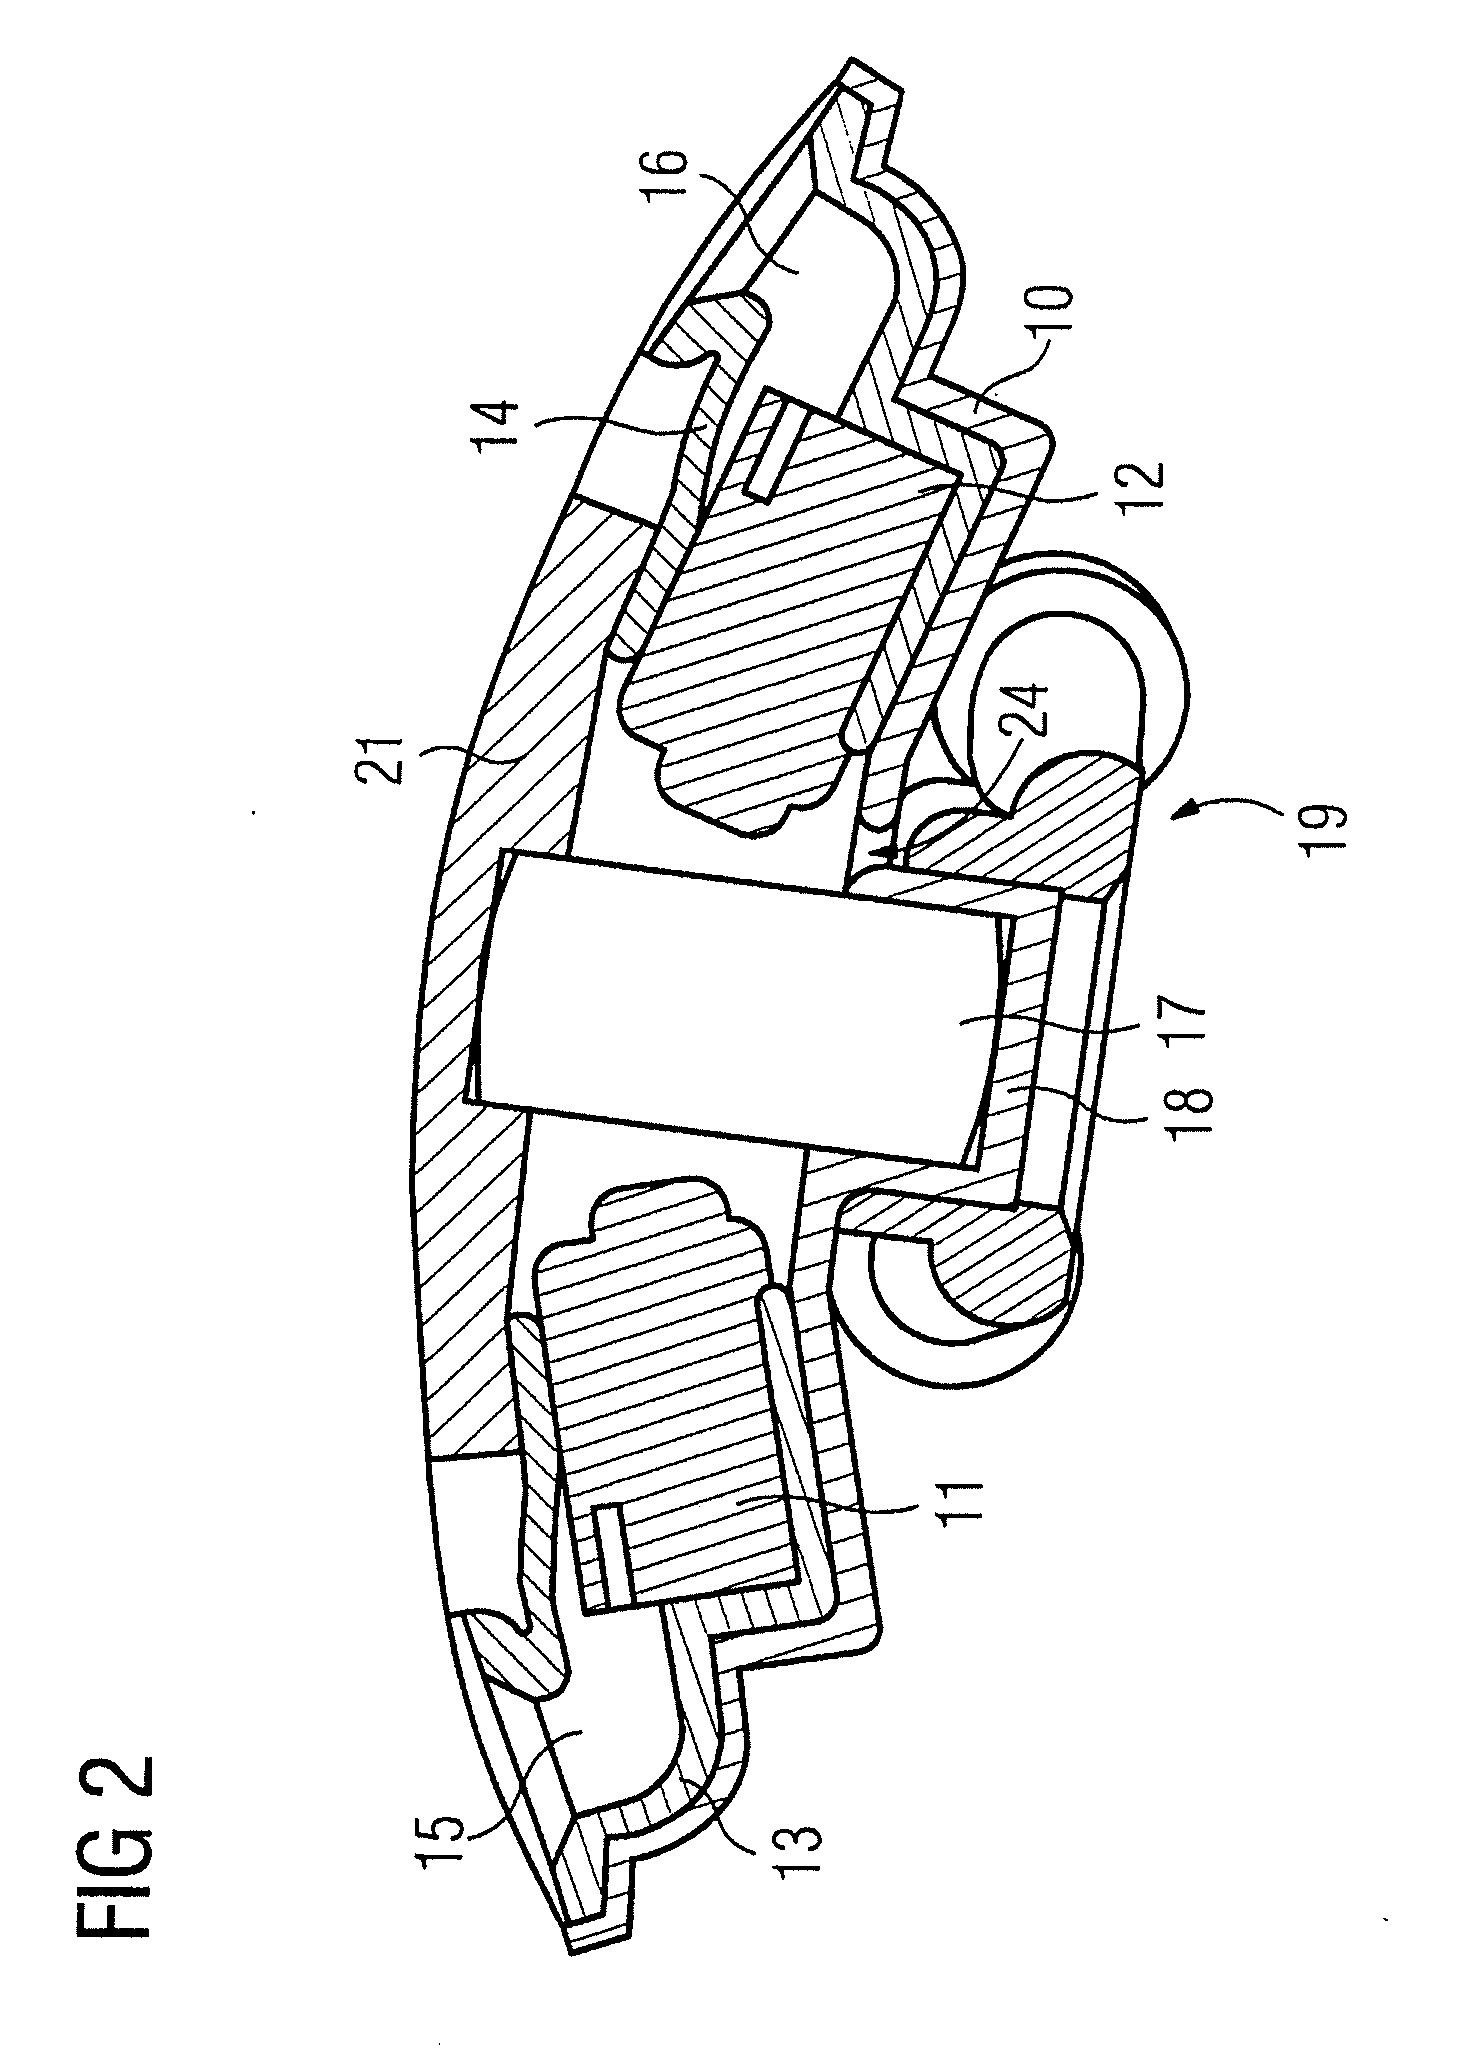 Microphone module for a hearing device